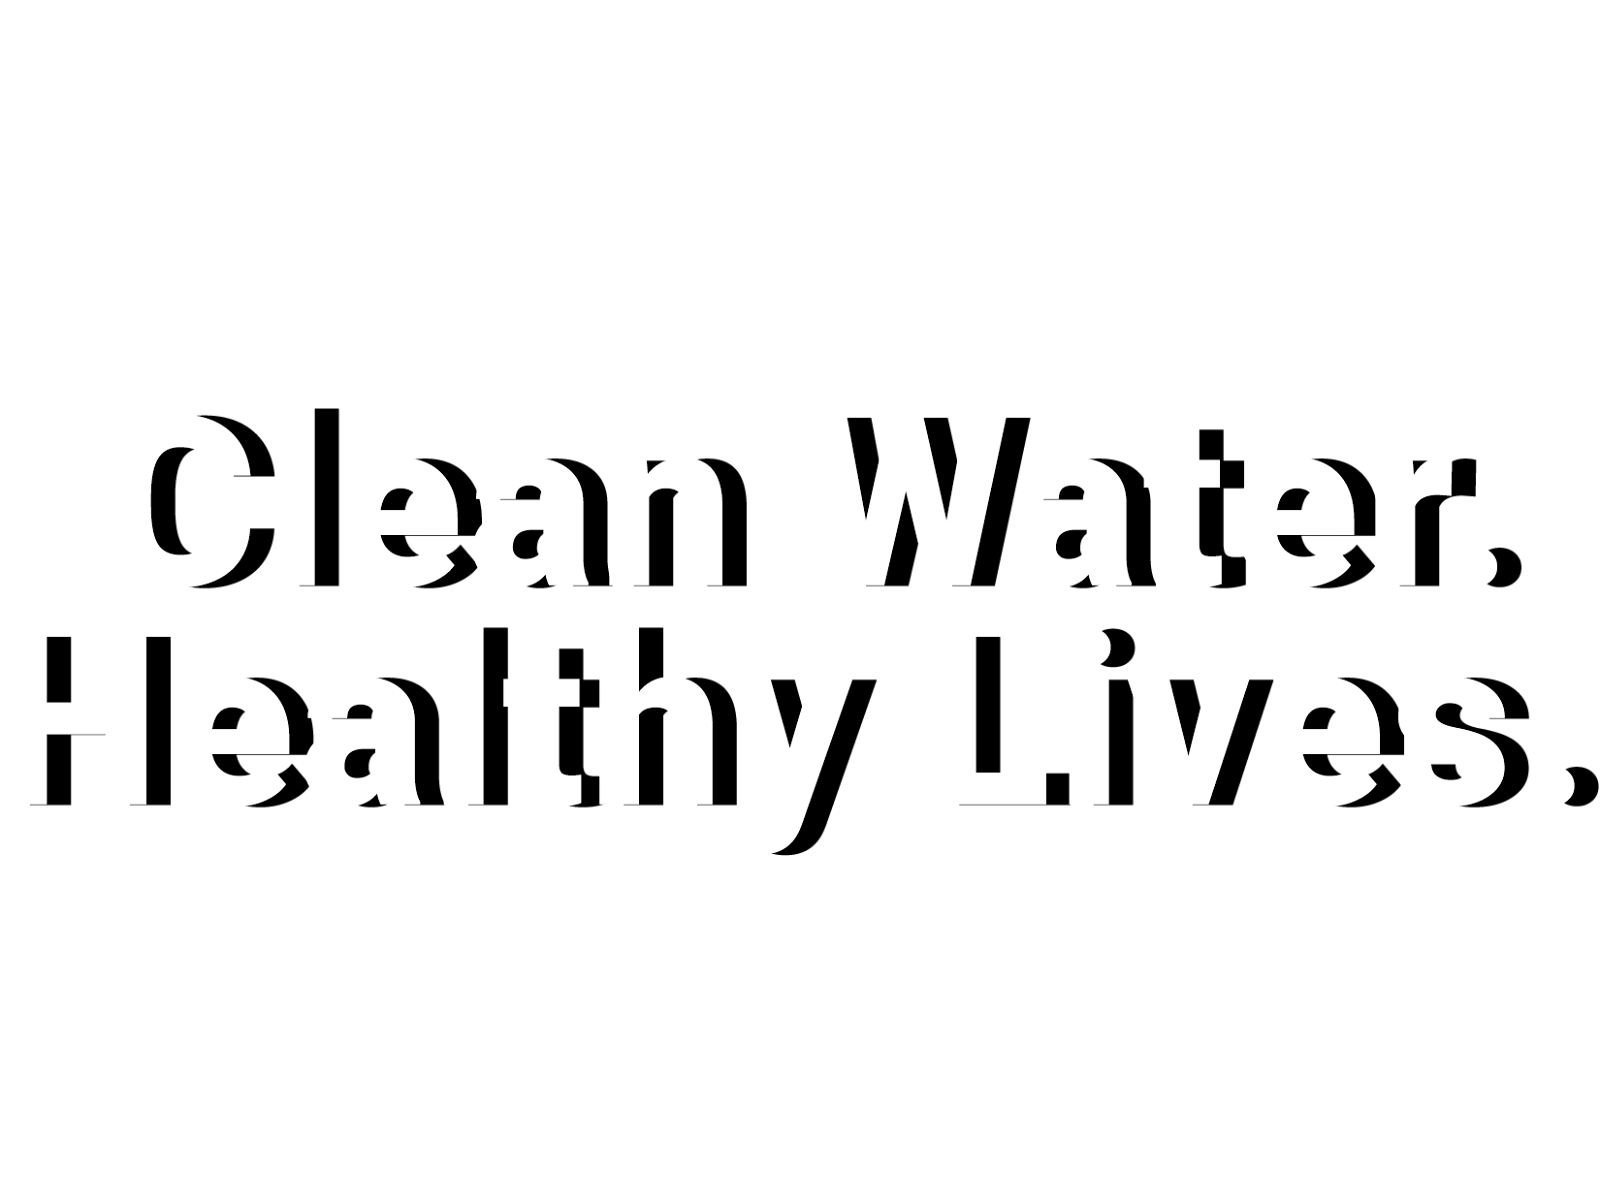 Clean Water. Healthy Lives